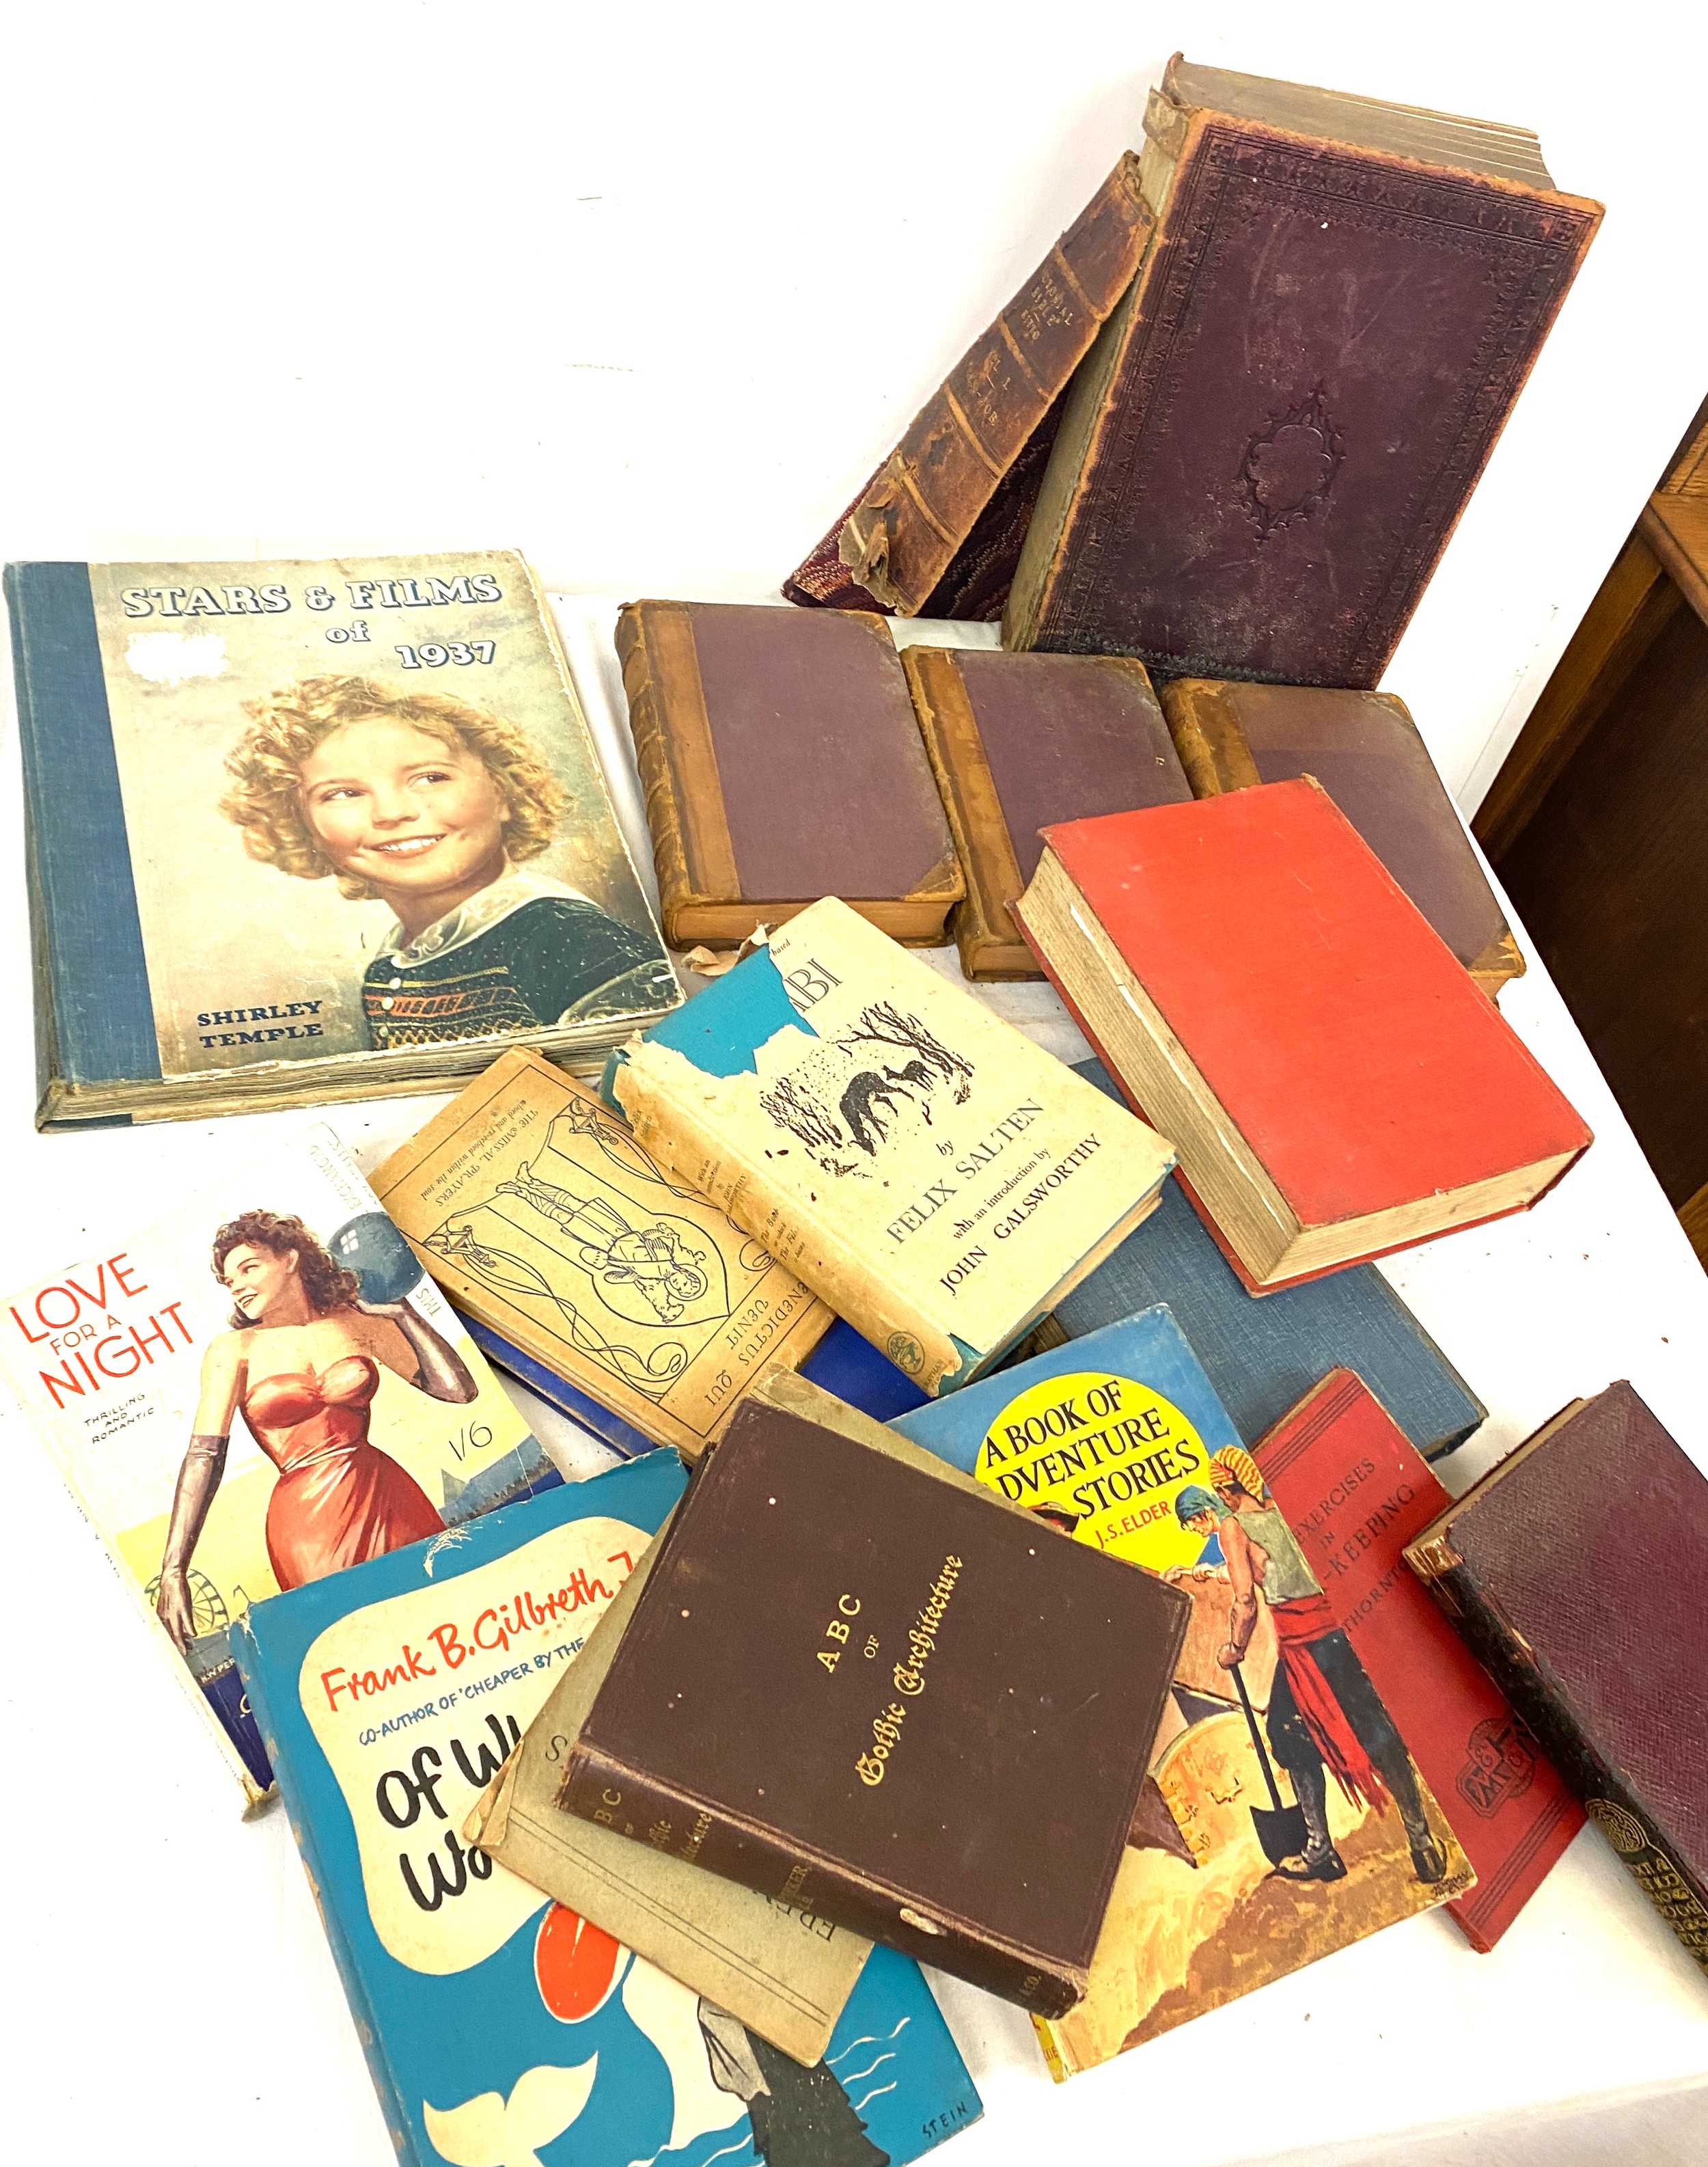 Selection of vintage books to include stars and films of 1937, antique bible etc - Image 2 of 4